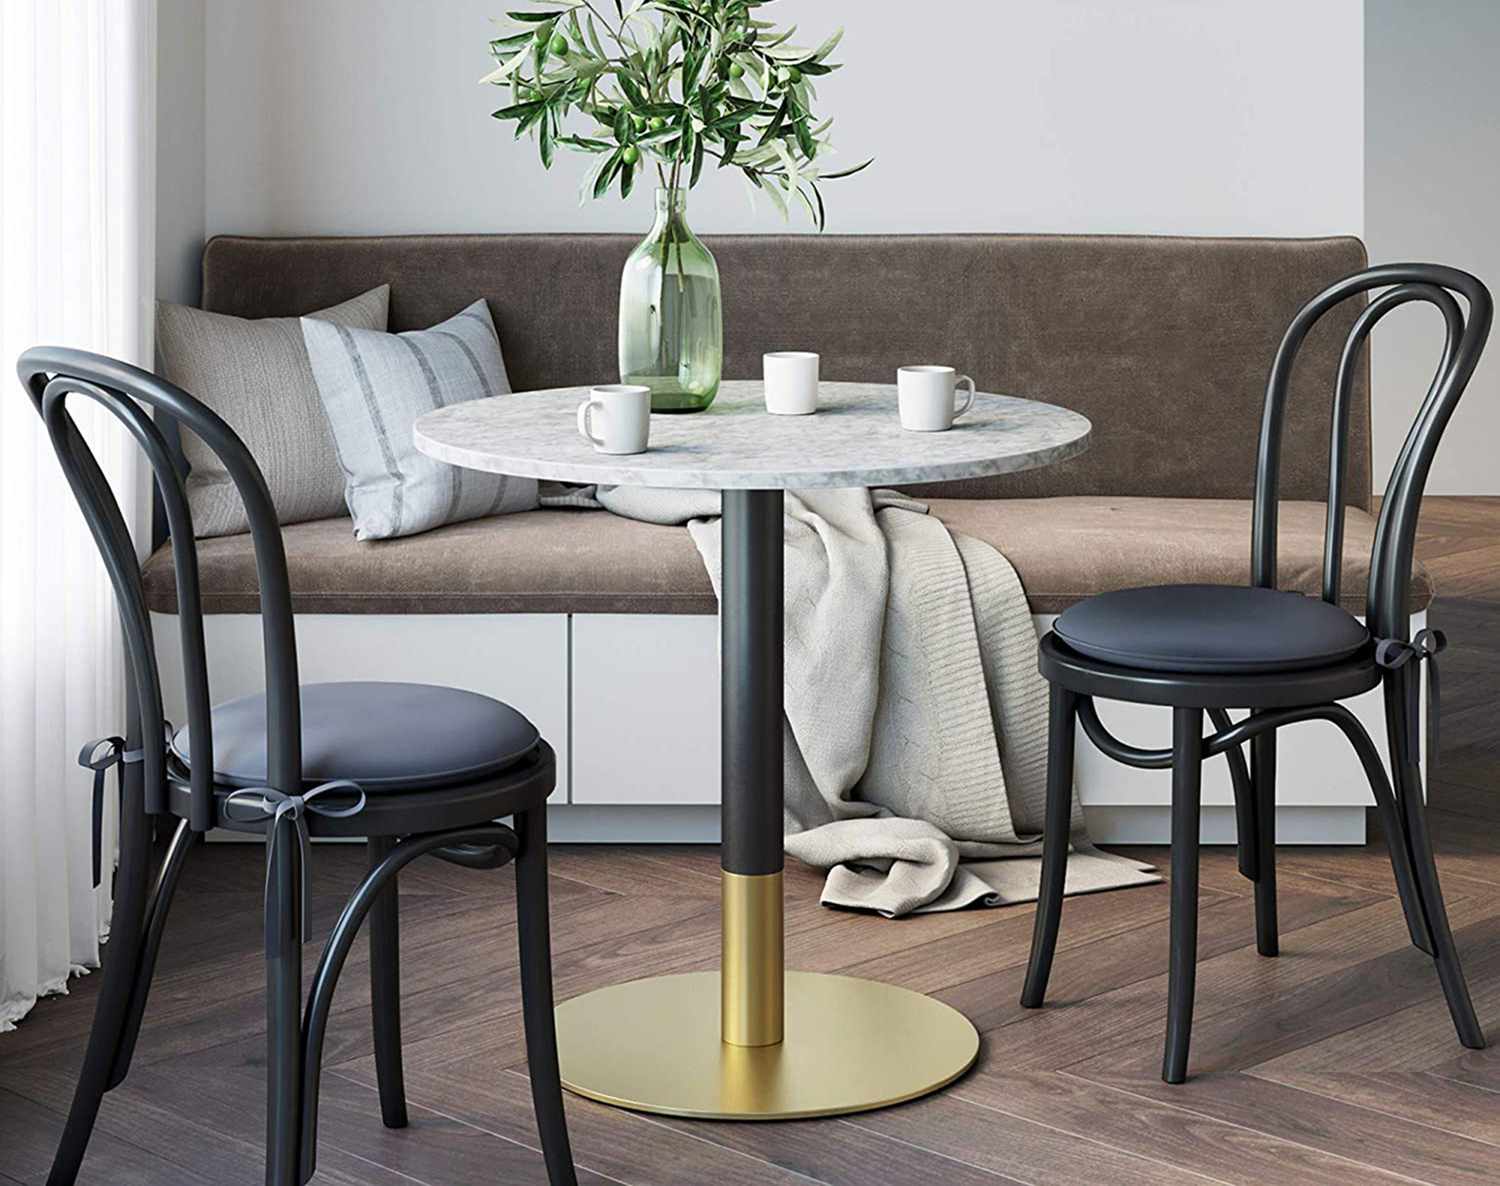 8 Best Dining Tables For Small Spaces, Dining Room Tables For Tiny Spaces